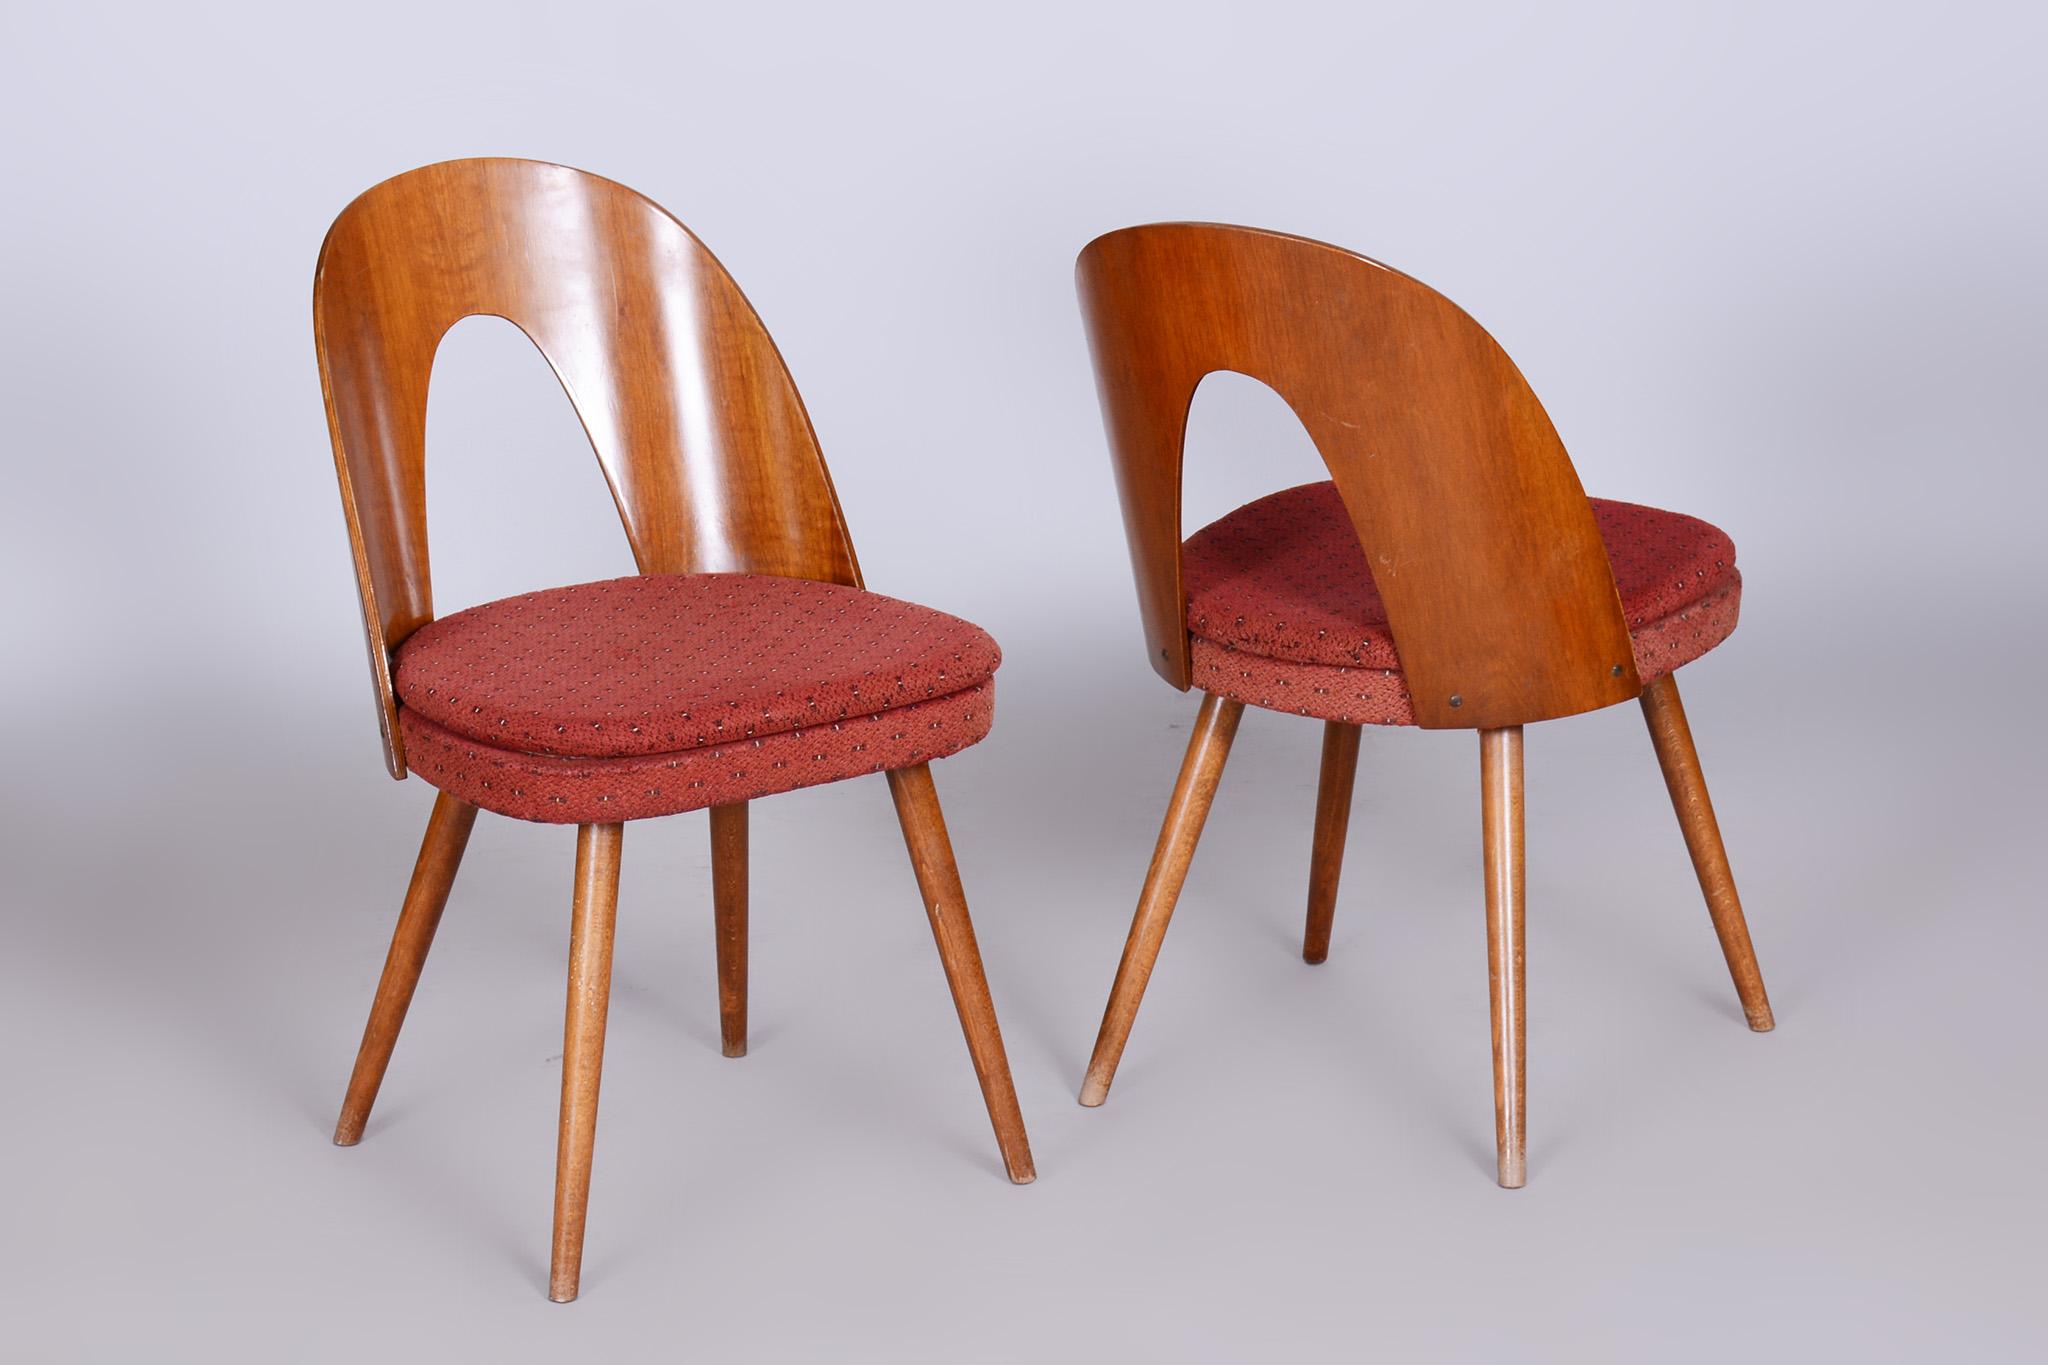 Pair of Mid-Century Chairs Designed by Antonin Suman, 1950s, Czechia For Sale 2